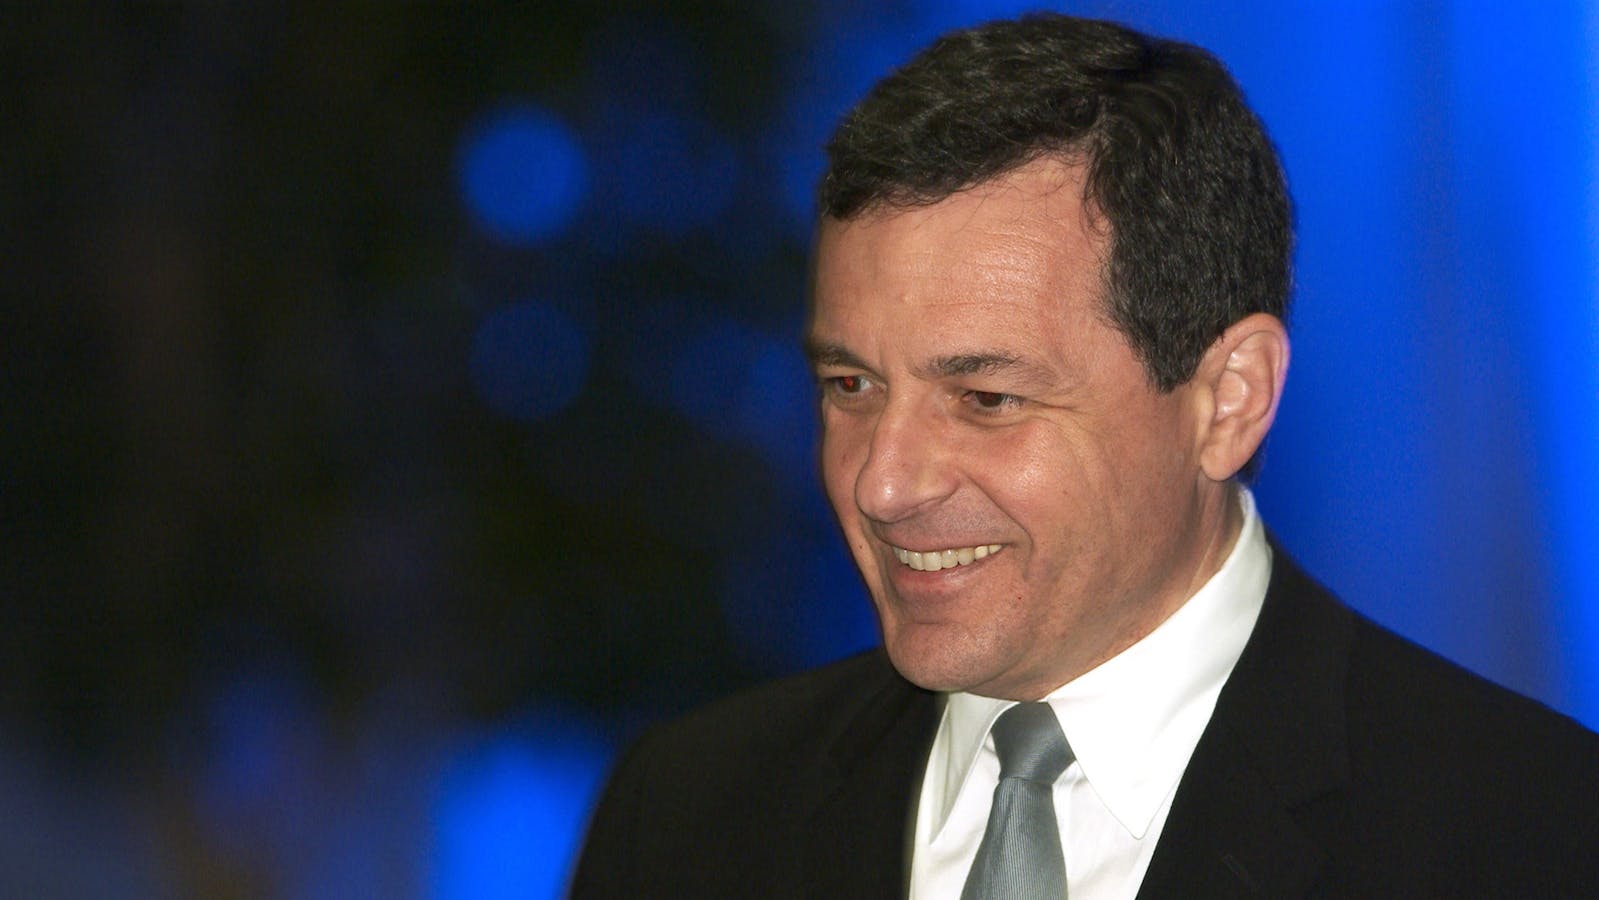 Disney CEO Bob Iger. Photo by Bloomberg.